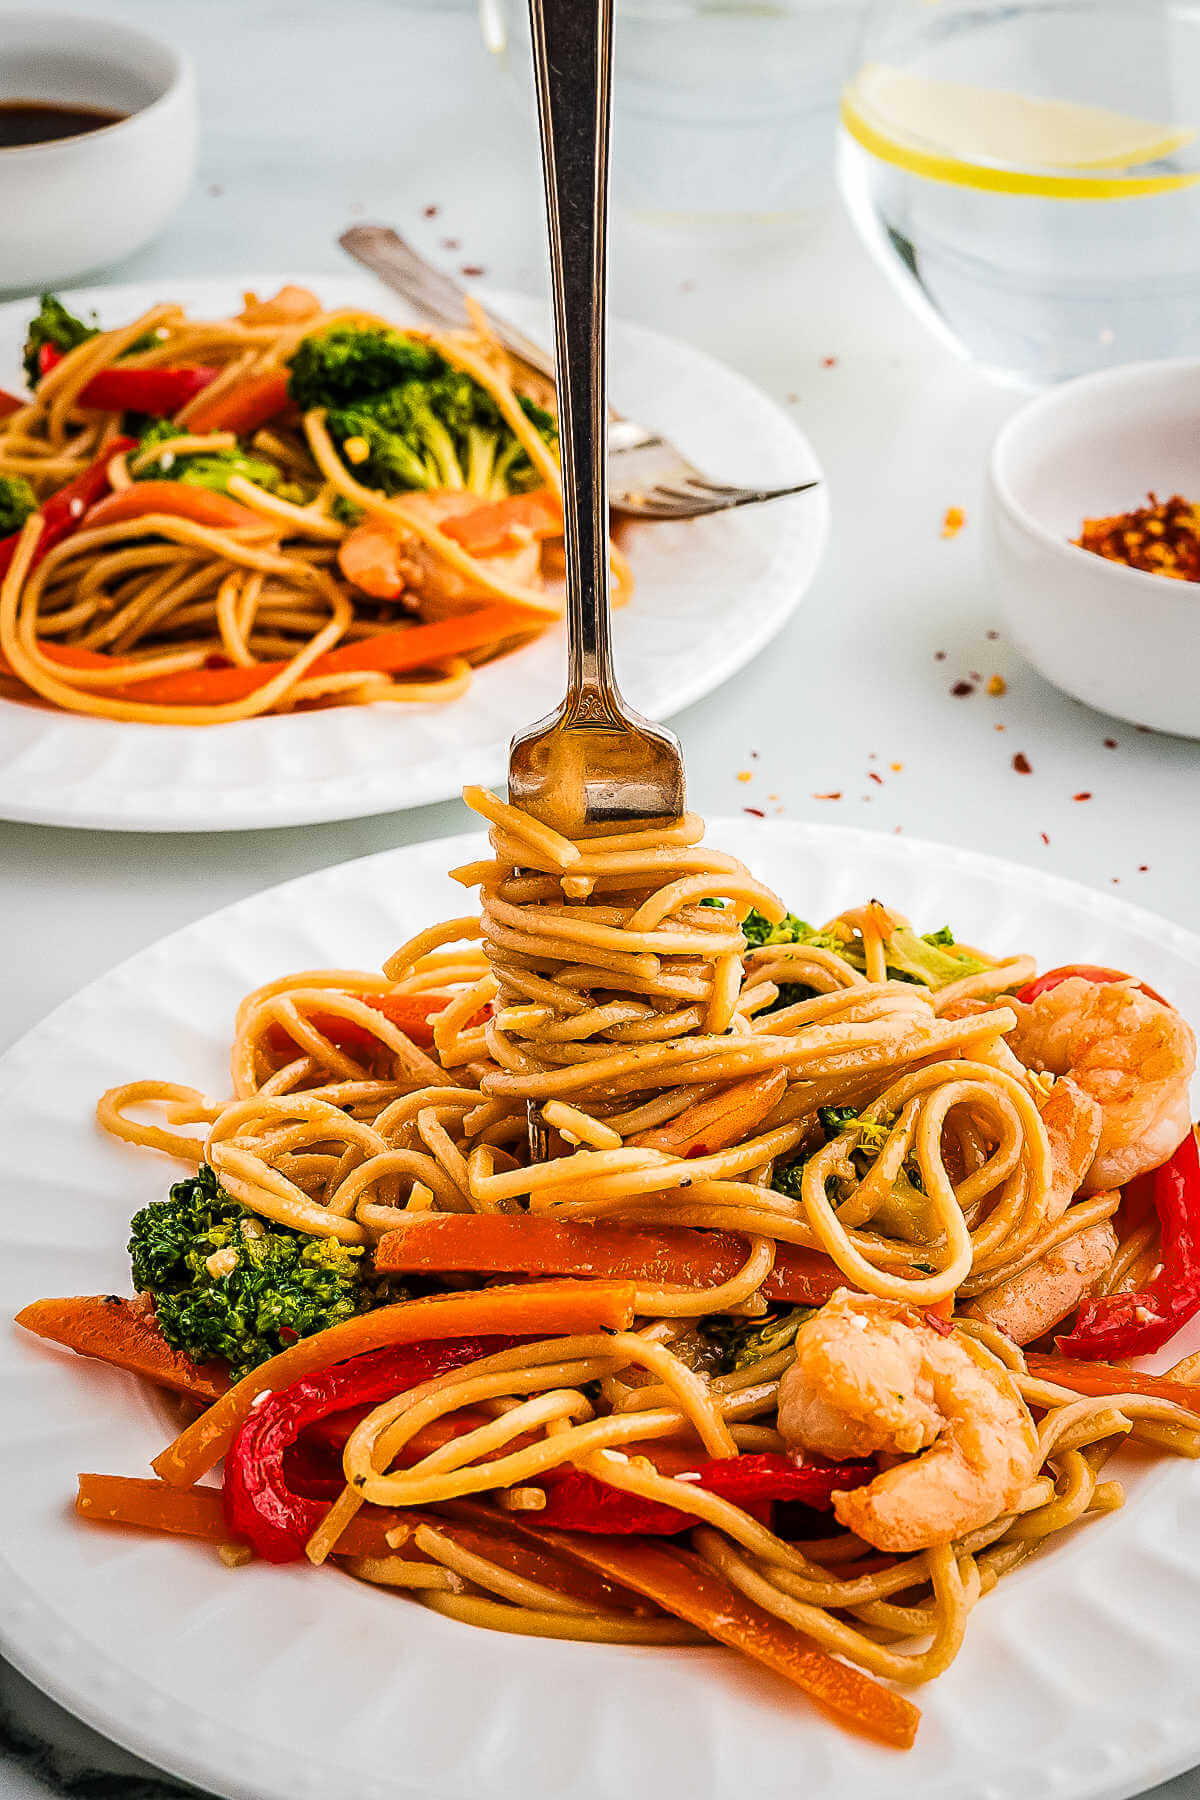 A fork twirling noodles on a plate.